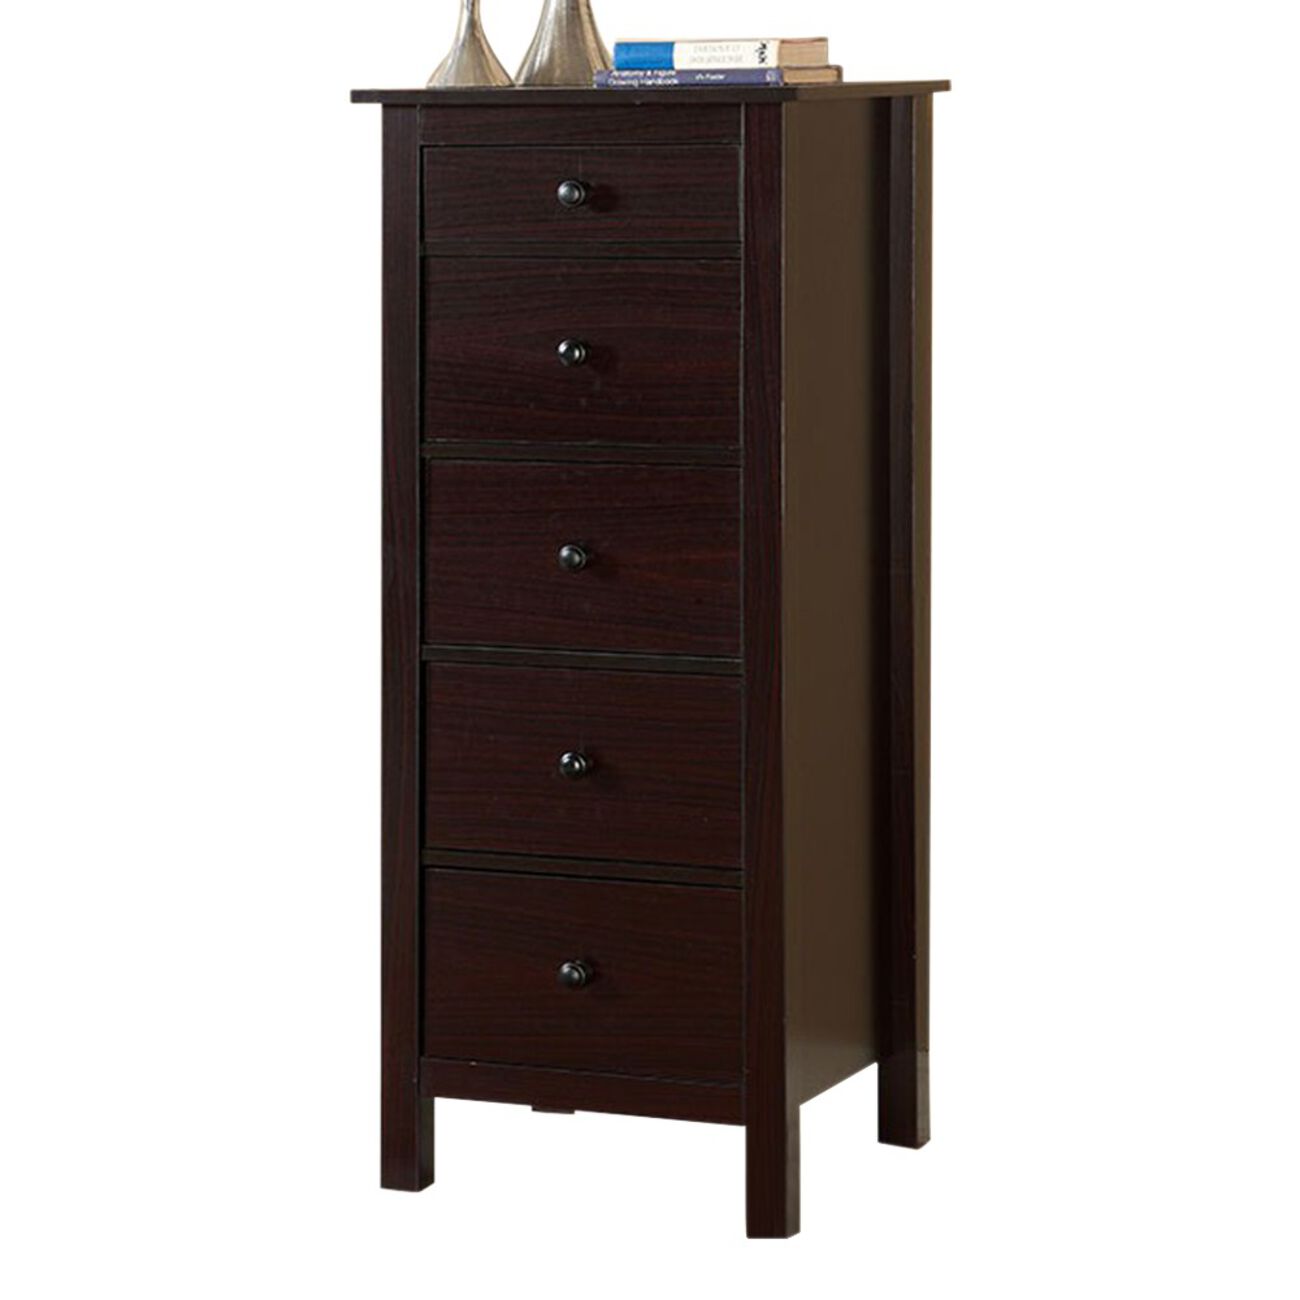 Transitional Style Wooden Chest With 5 Drawers, Brown